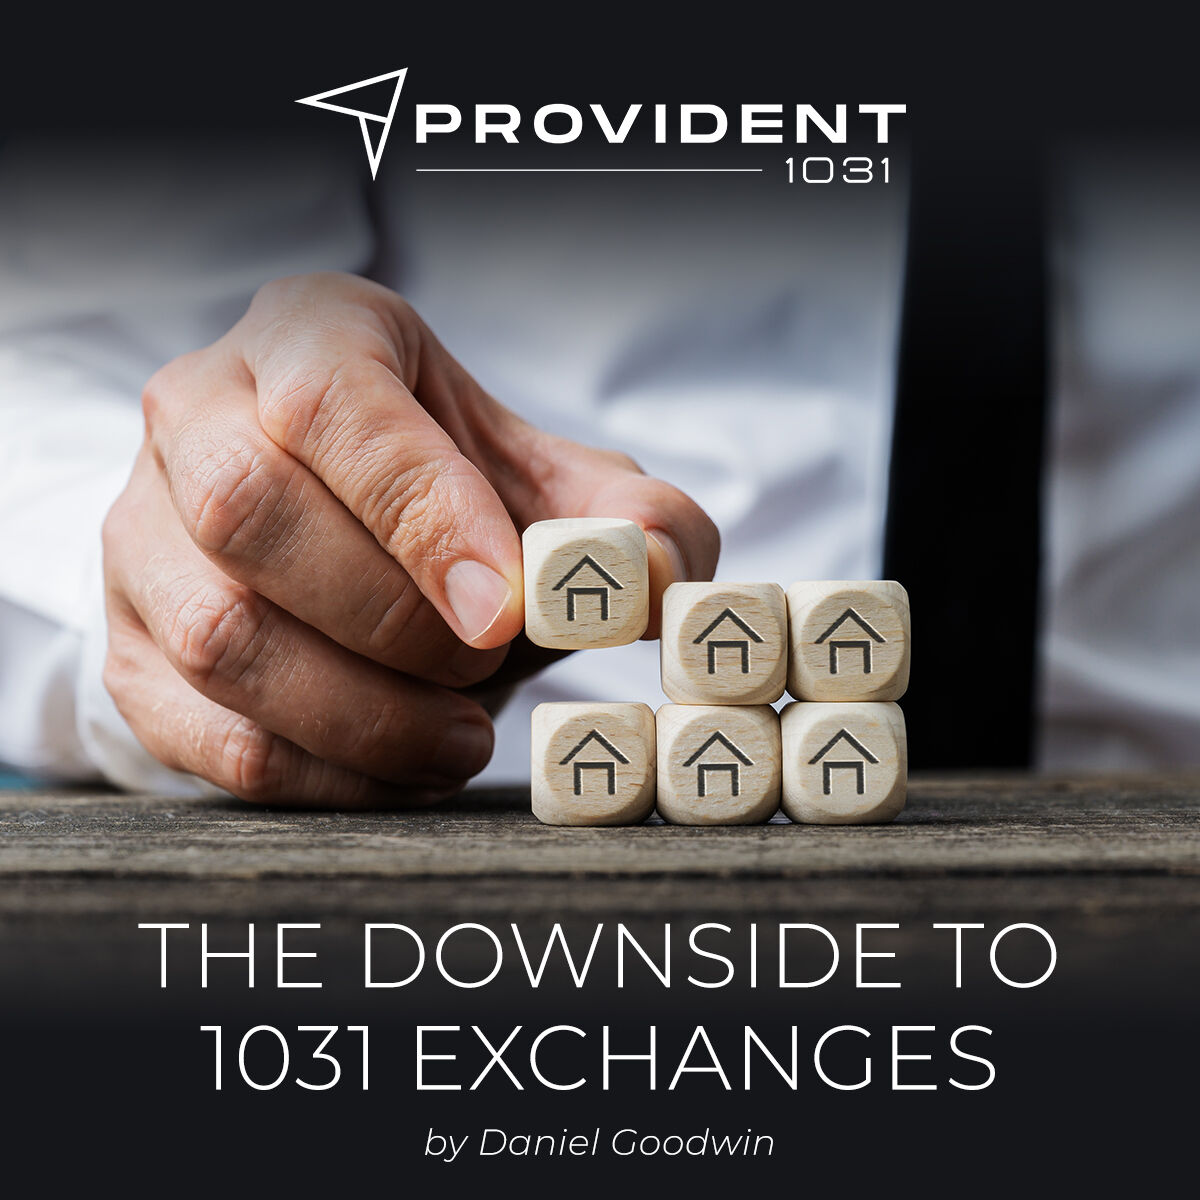 There is a downside to 1031 exchanges – they only benefit real estate investors. -- bit.ly/3XYxr7w